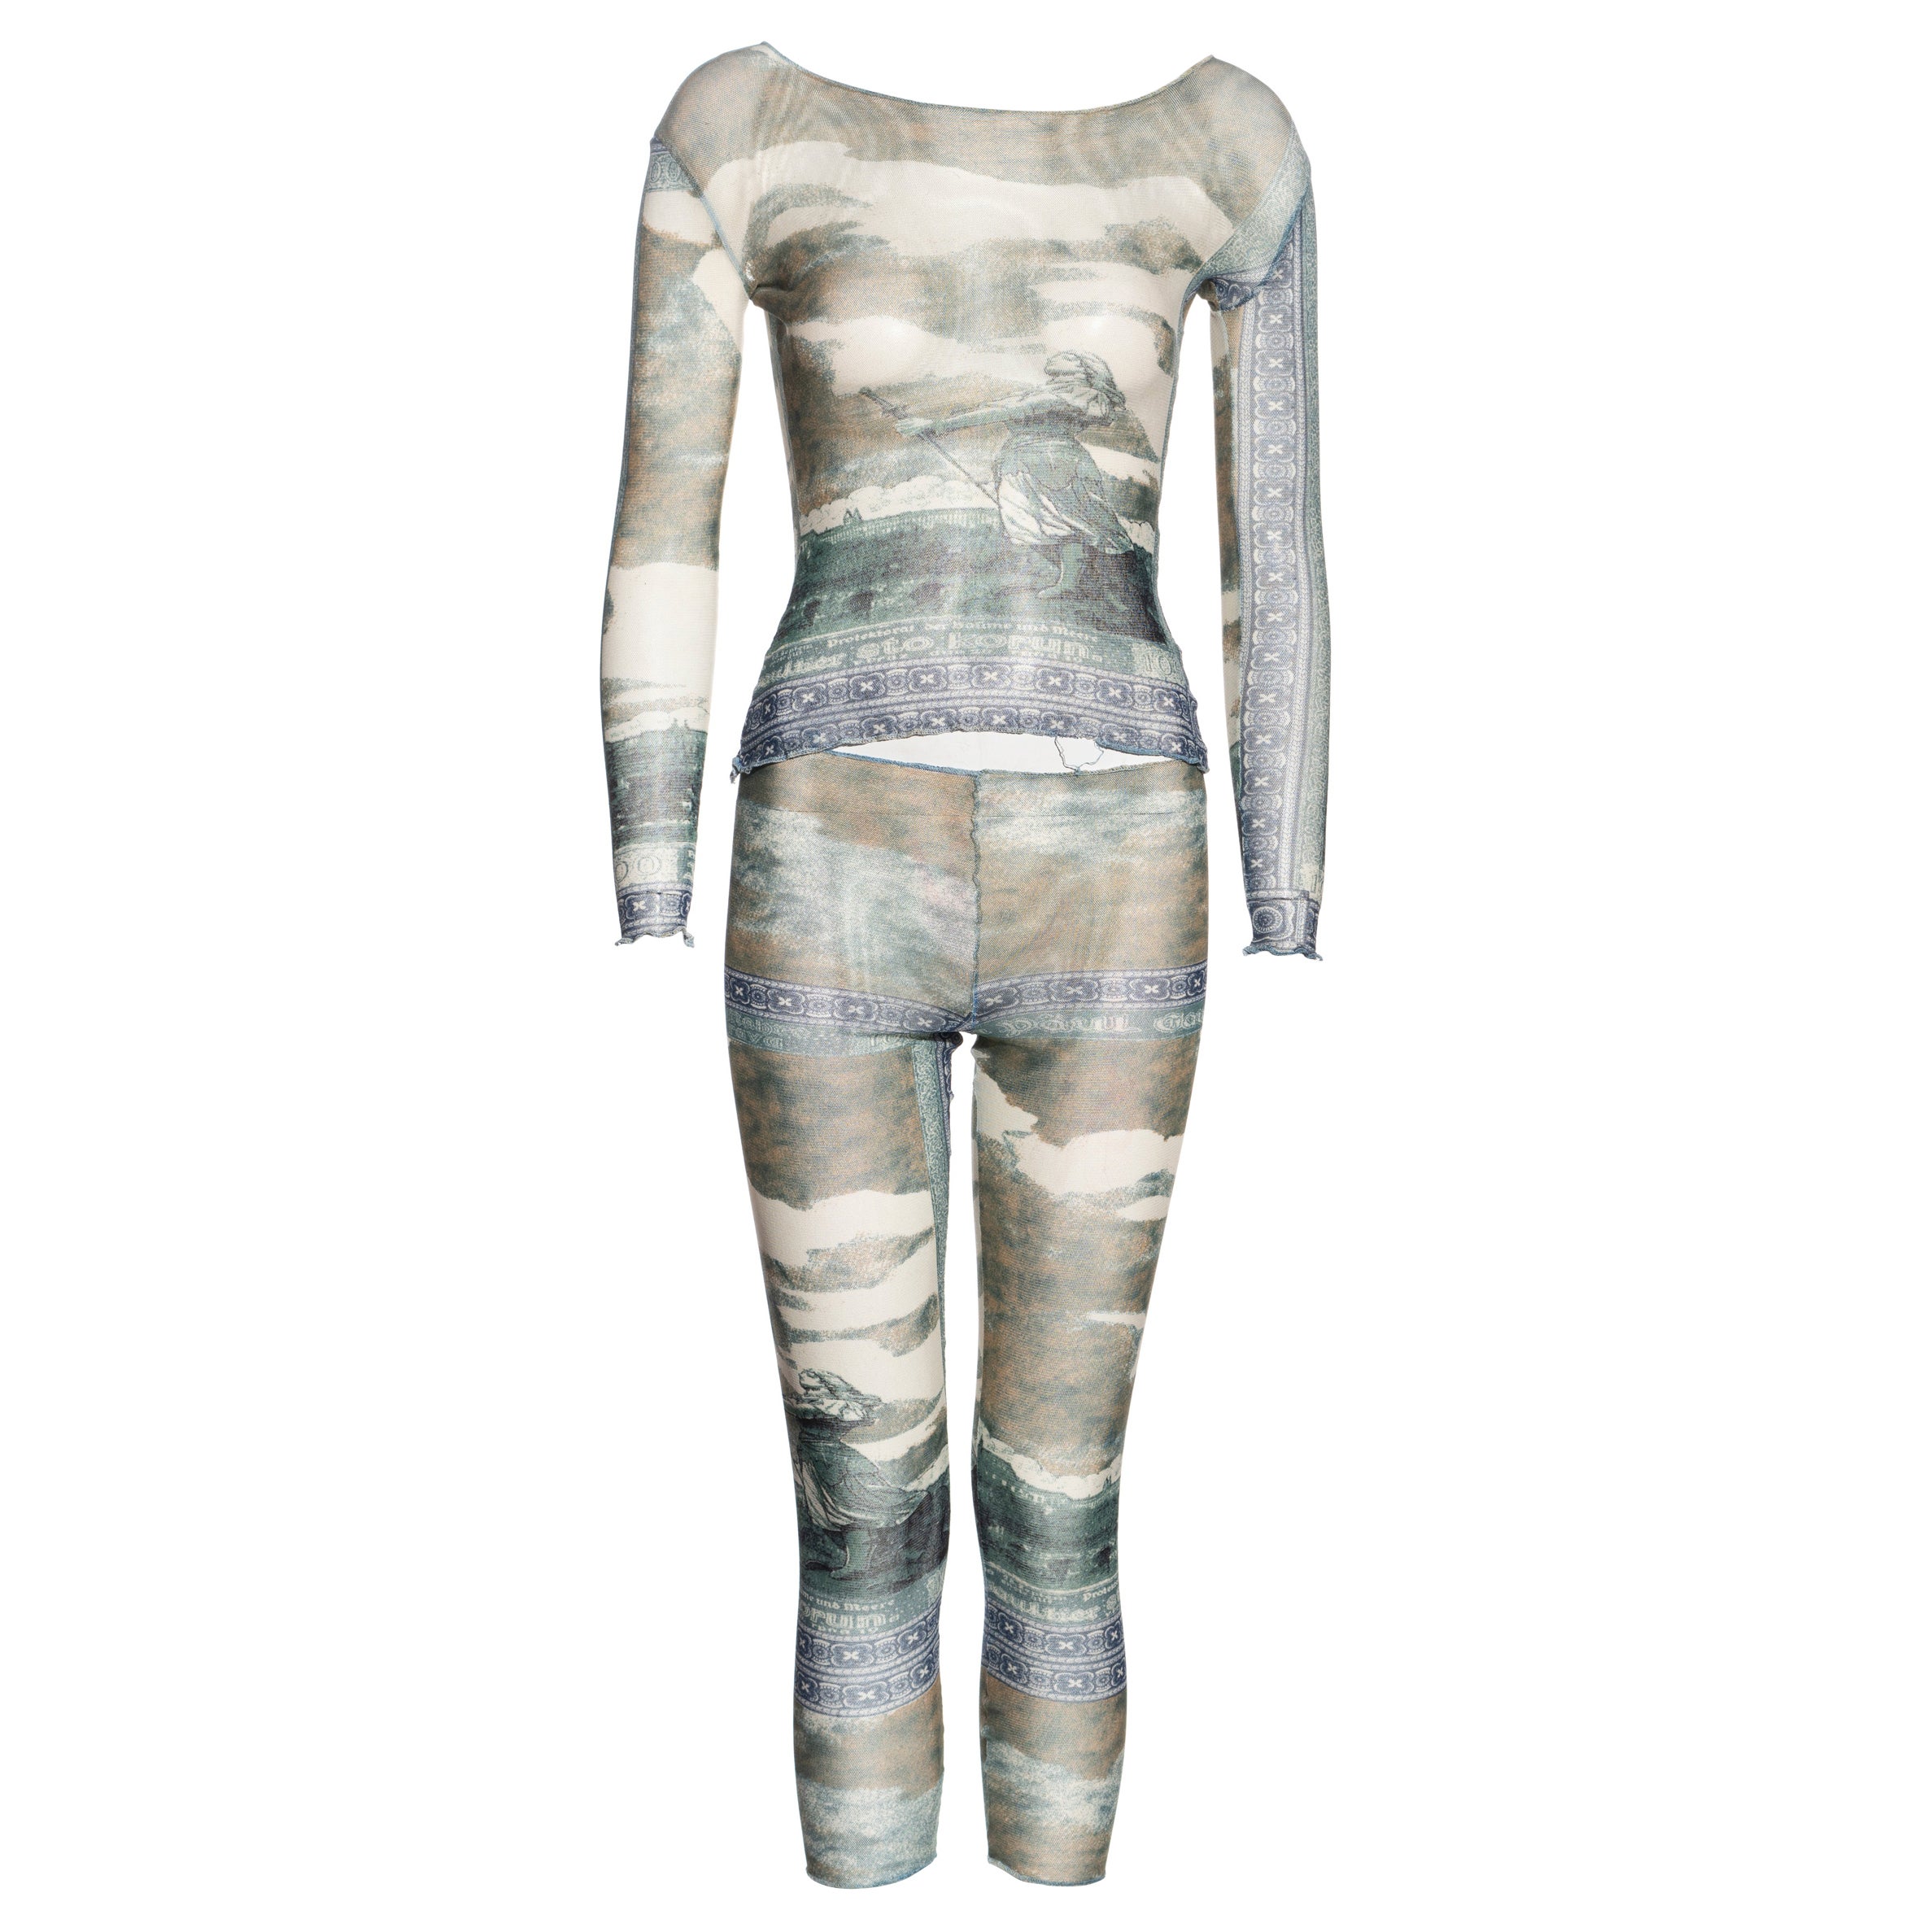 Jean Paul Gaultier tattoo-currency print mesh top and leggings set, ss 1994